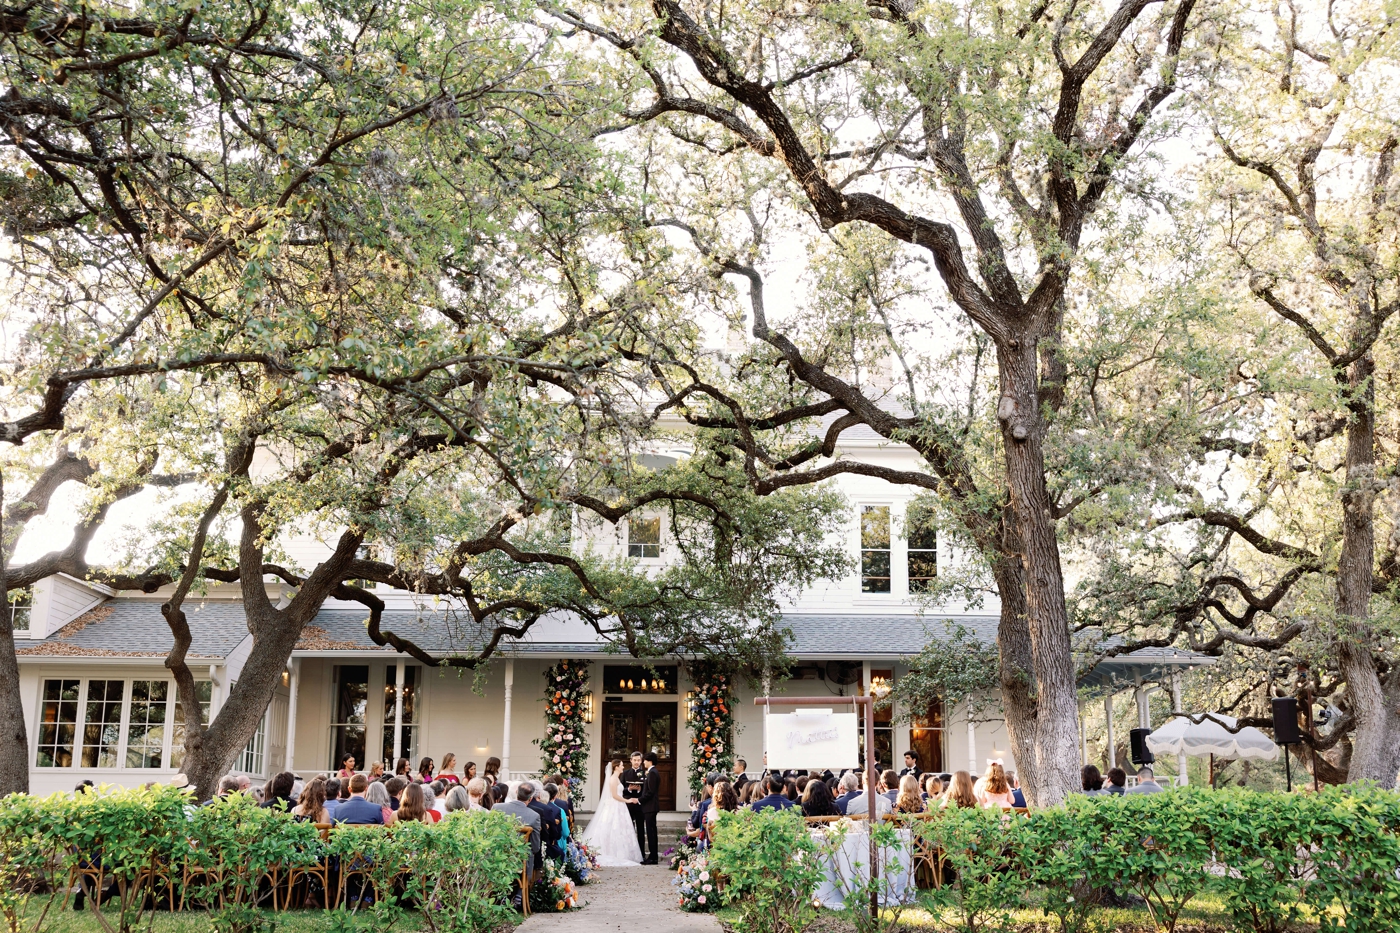 Outdoor wedding ceremony at Mattie's green pastures on the lawn